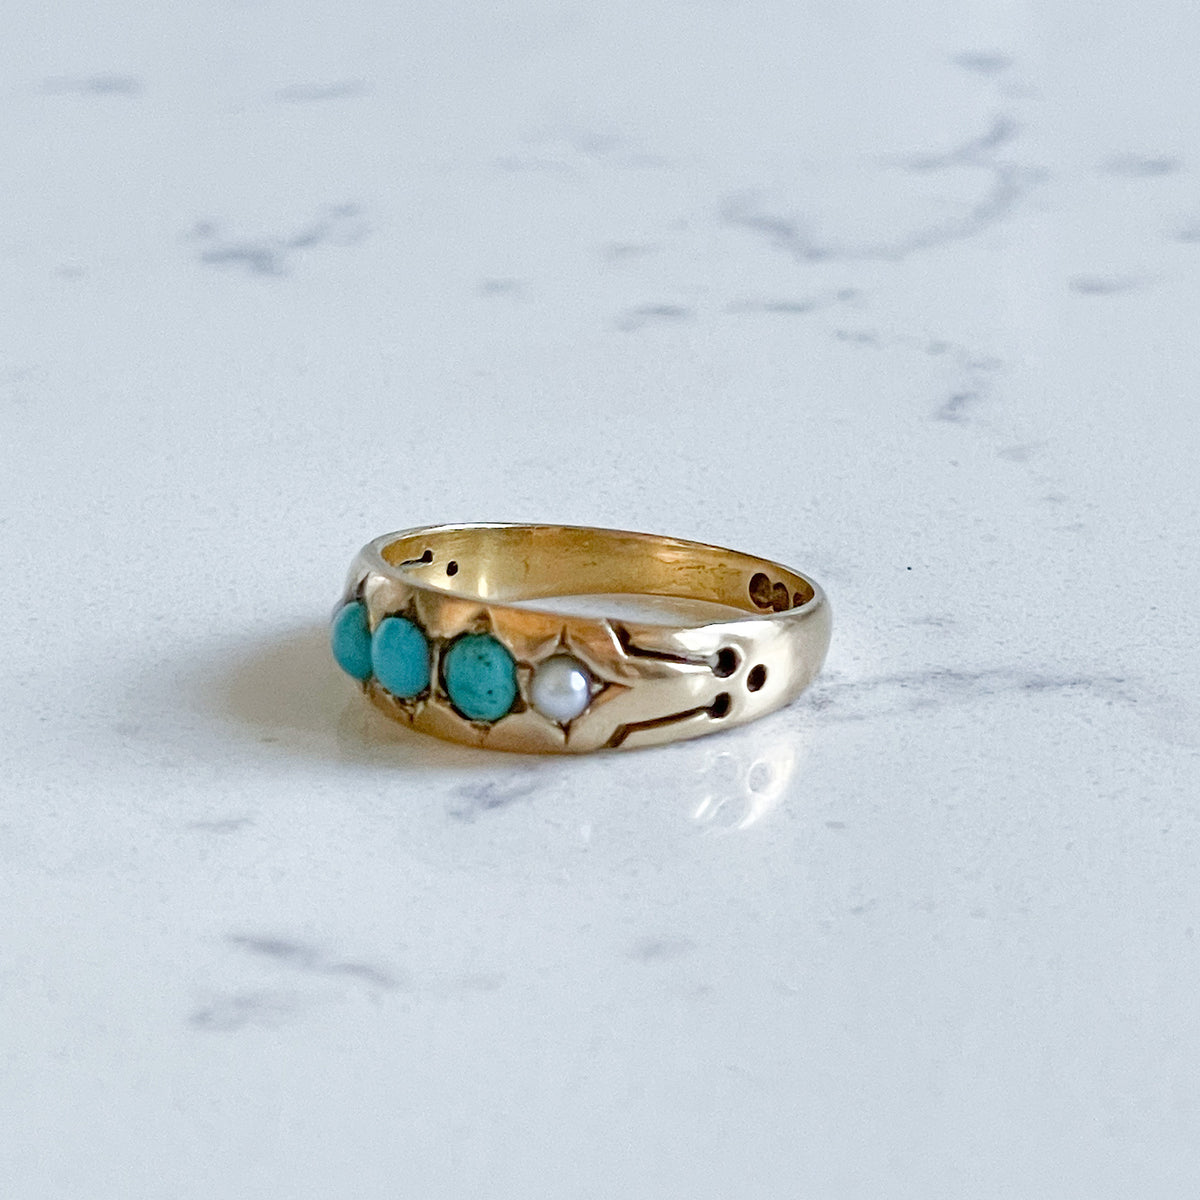 Antique 18K Gold Ring with Turquoise and Pearl, 1890